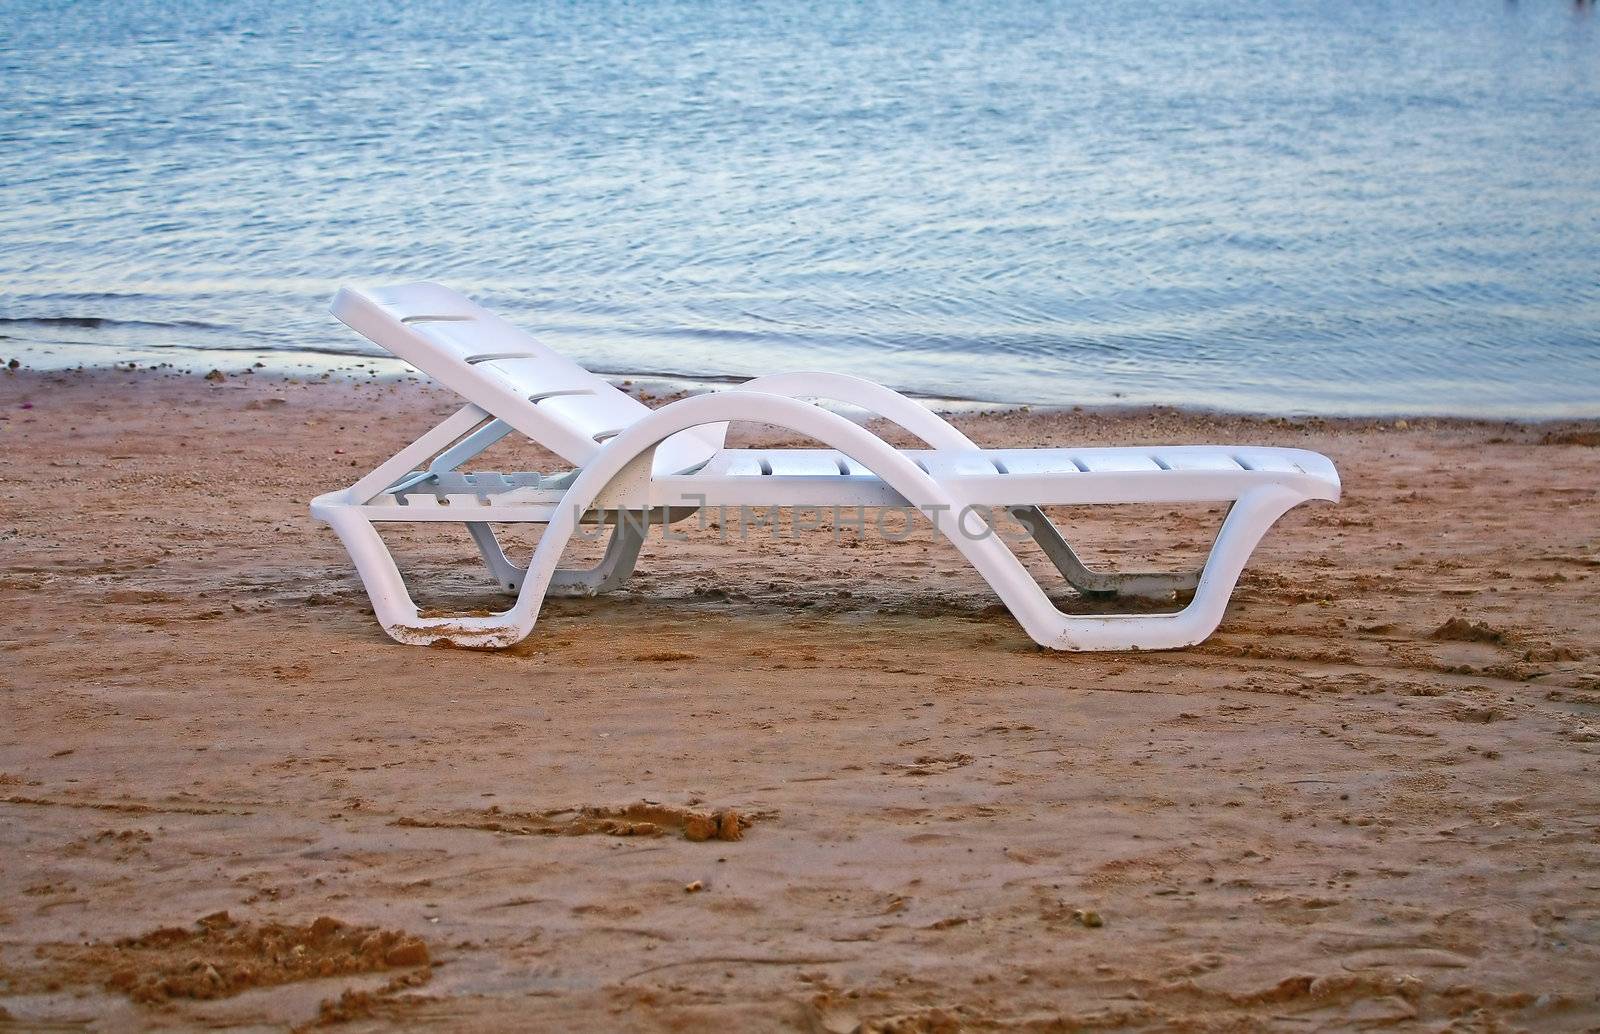 Egypt. Chaise stands on the sand at the beach.